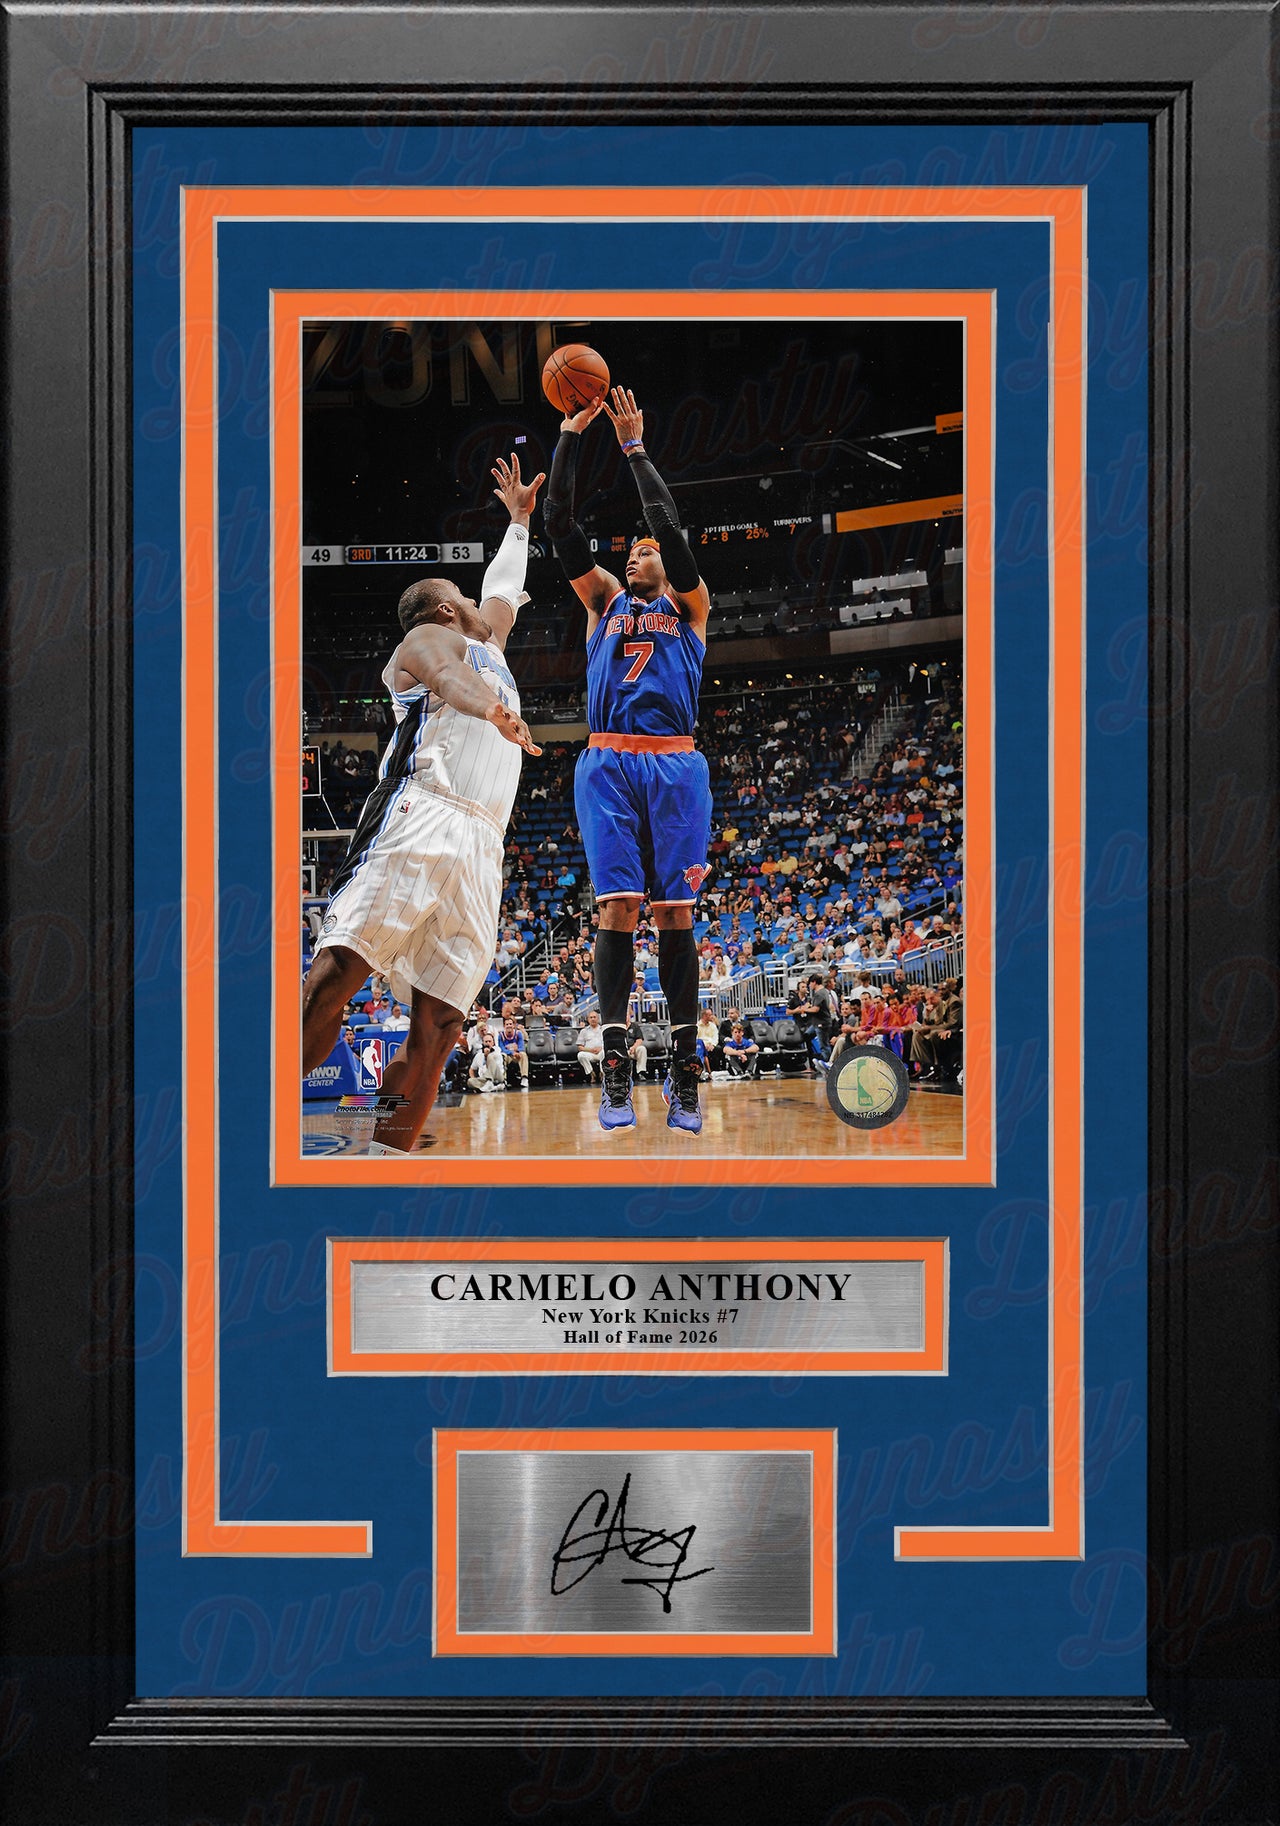 Carmelo Anthony Shooting Action New York Knicks 8x10 Framed Basketball Photo with Engraved Autograph - Dynasty Sports & Framing 